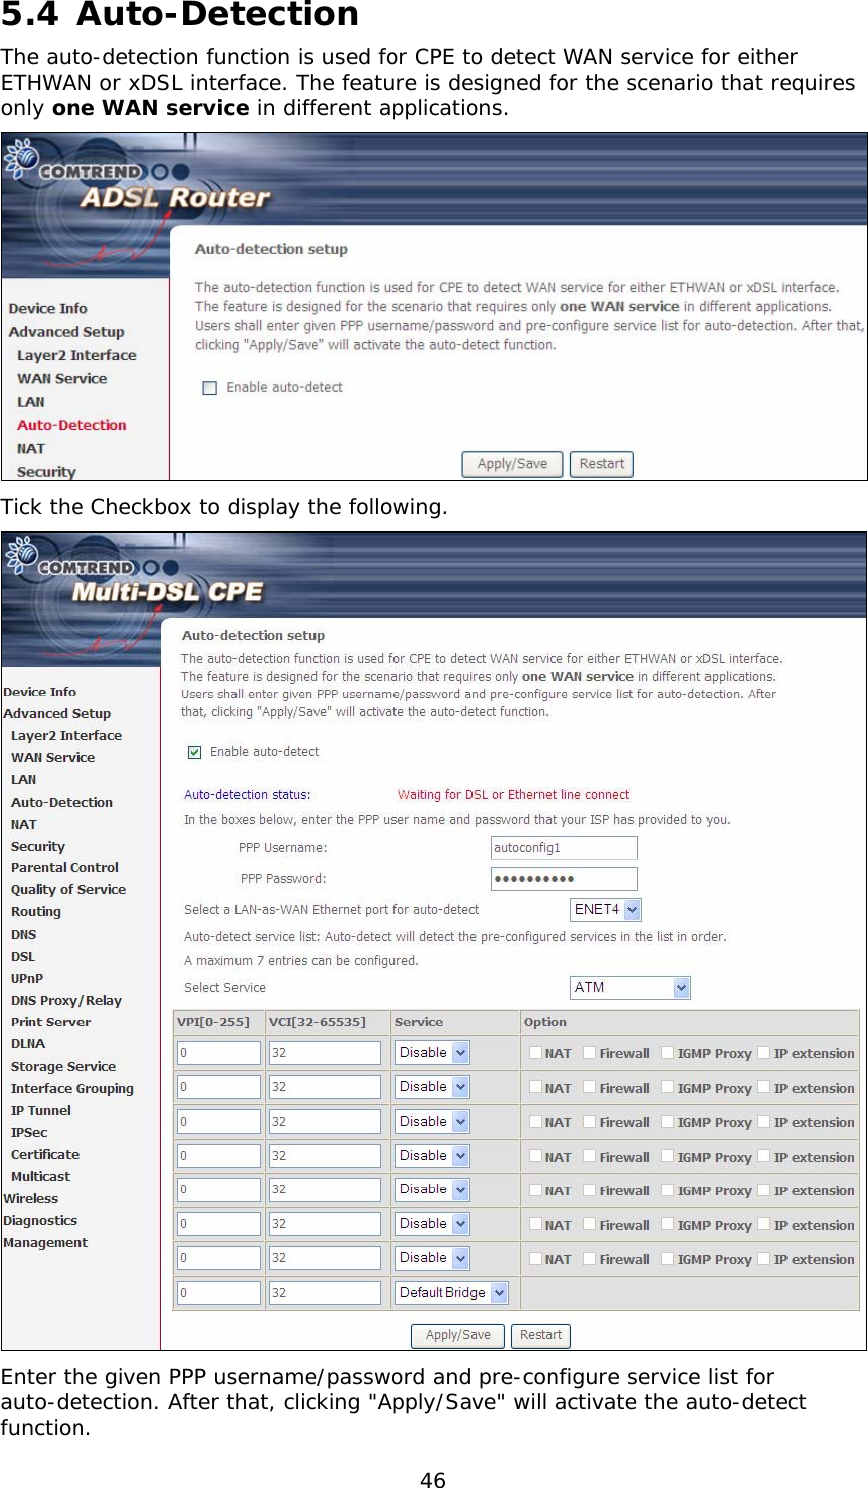  46 5.4 Auto-Detection The auto-detection function is used for CPE to detect WAN service for either ETHWAN or xDSL interface. The feature is designed for the scenario that requires only one WAN service in different applications.   Tick the Checkbox to display the following.  Enter the given PPP username/password and pre-configure service list for auto-detection. After that, clicking &quot;Apply/Save&quot; will activate the auto-detect function. 